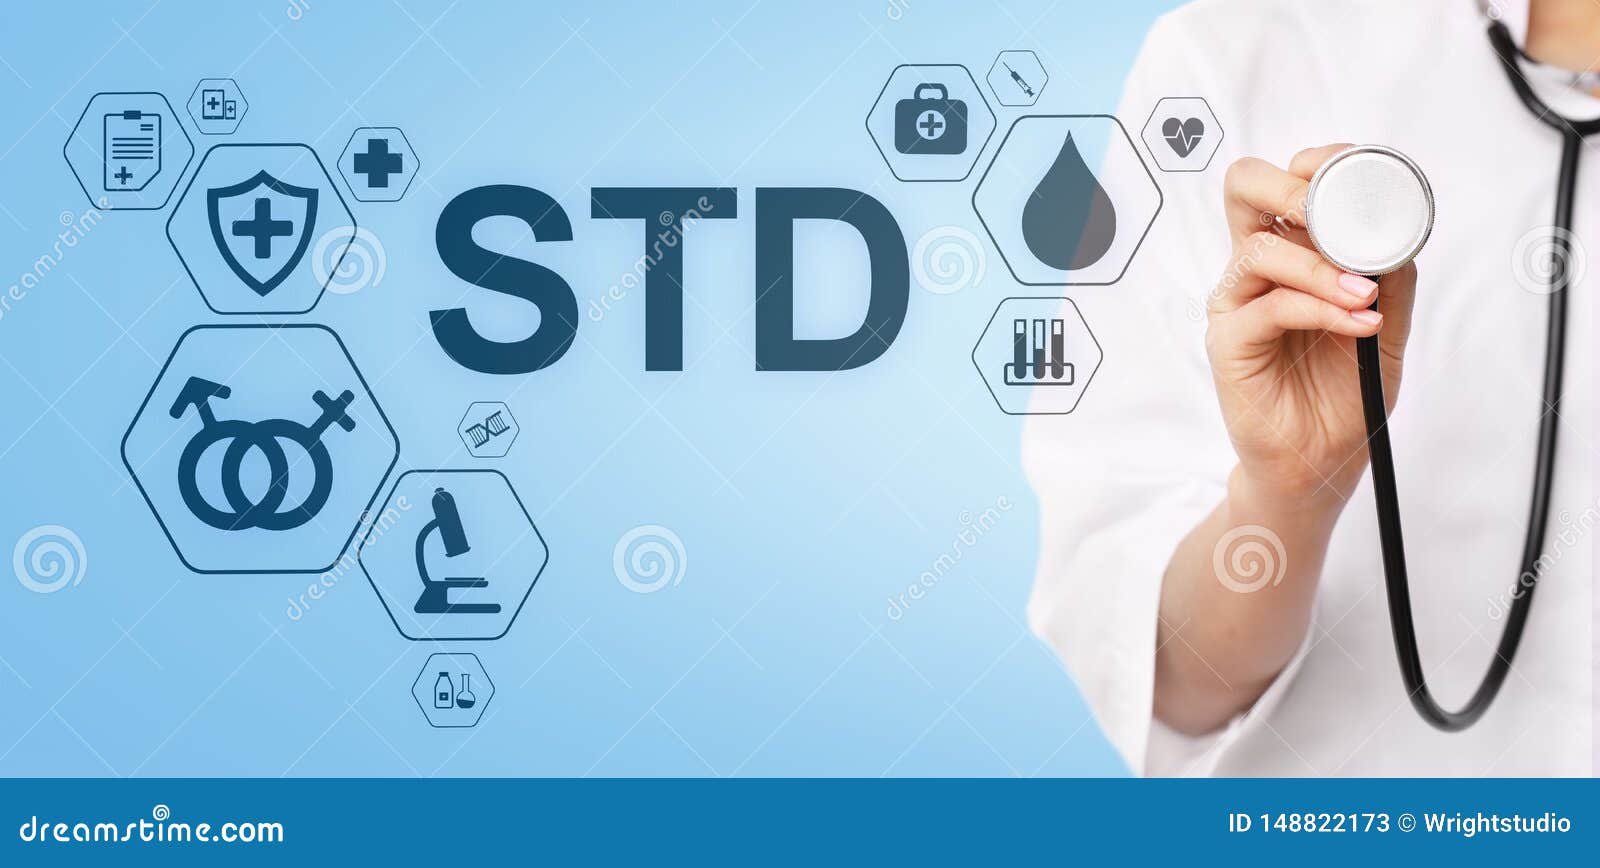 std test sexsual transmitted diseases diagnosis medical and healthcare concept.